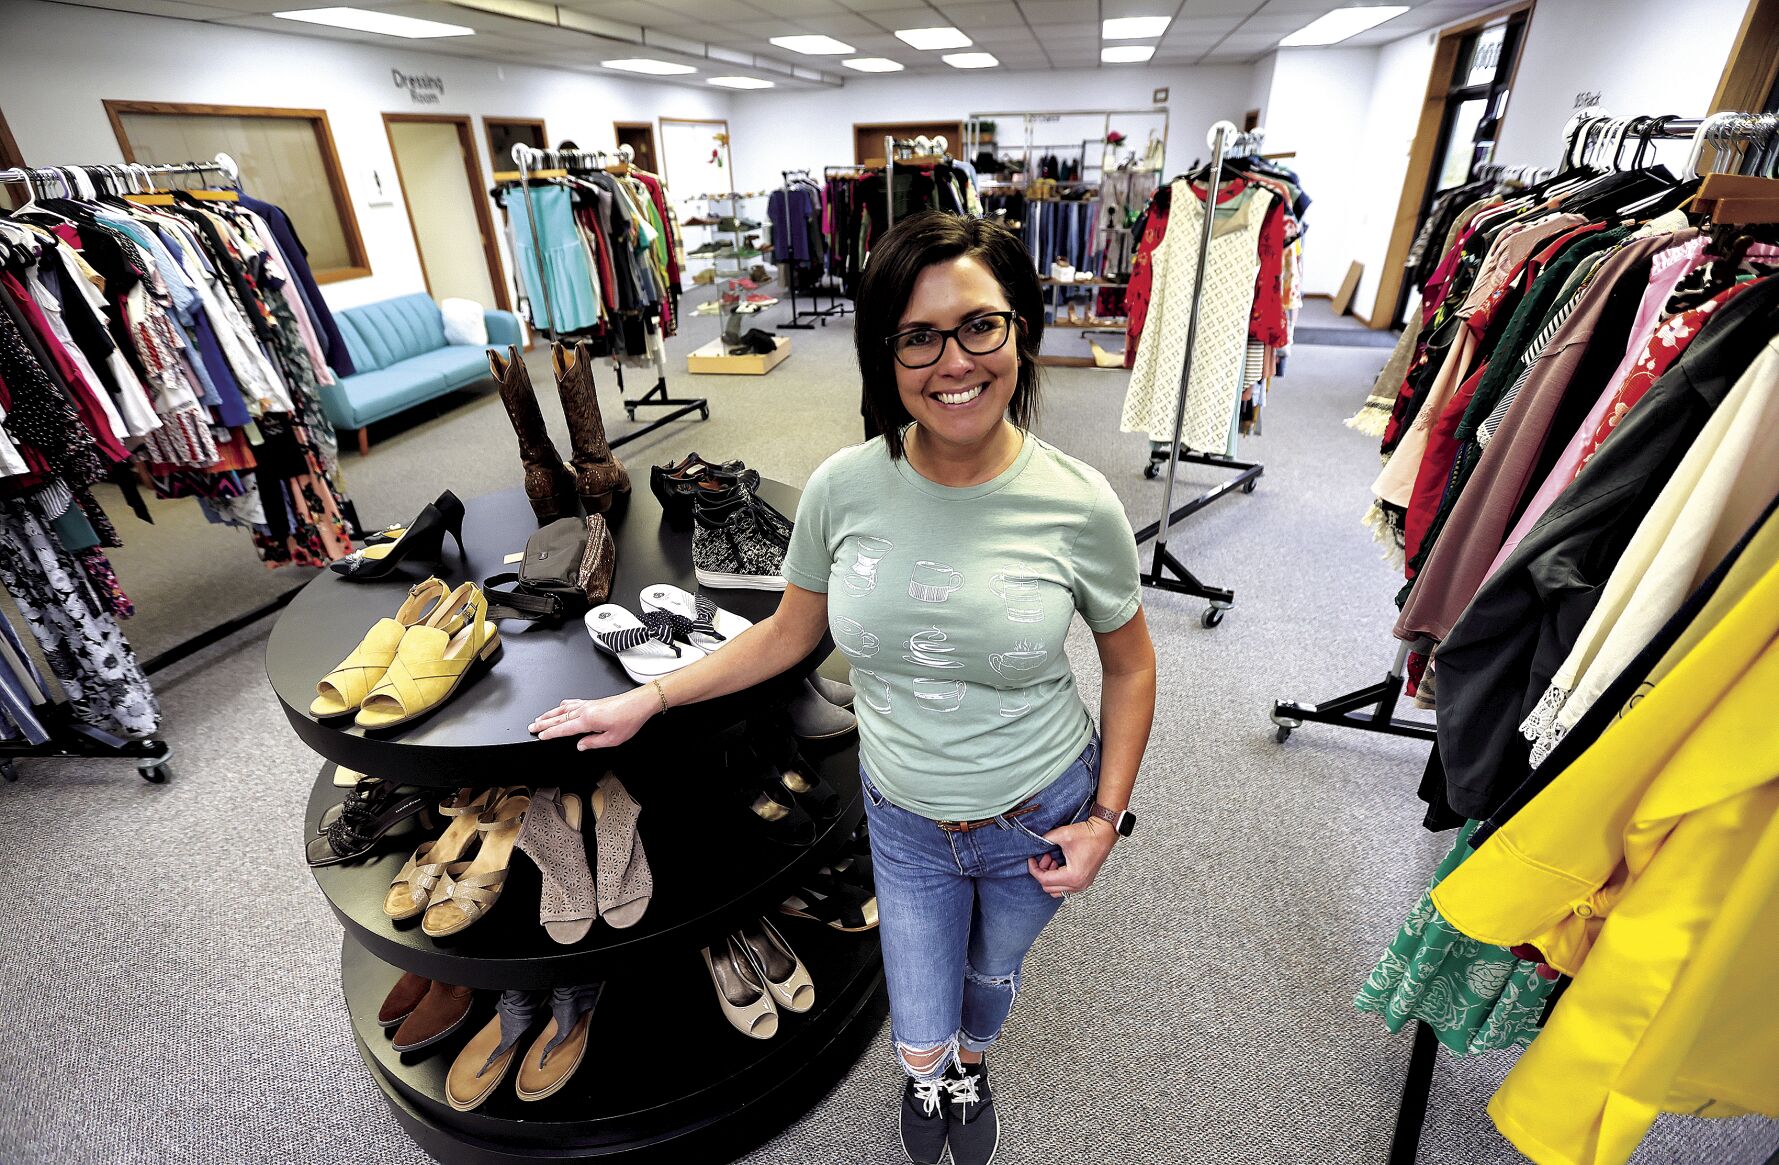 Samantha Wright, owner of Primrose, a consignment boutique, stands in the newly expanded area of the shop.    PHOTO CREDIT: Dave Kettering